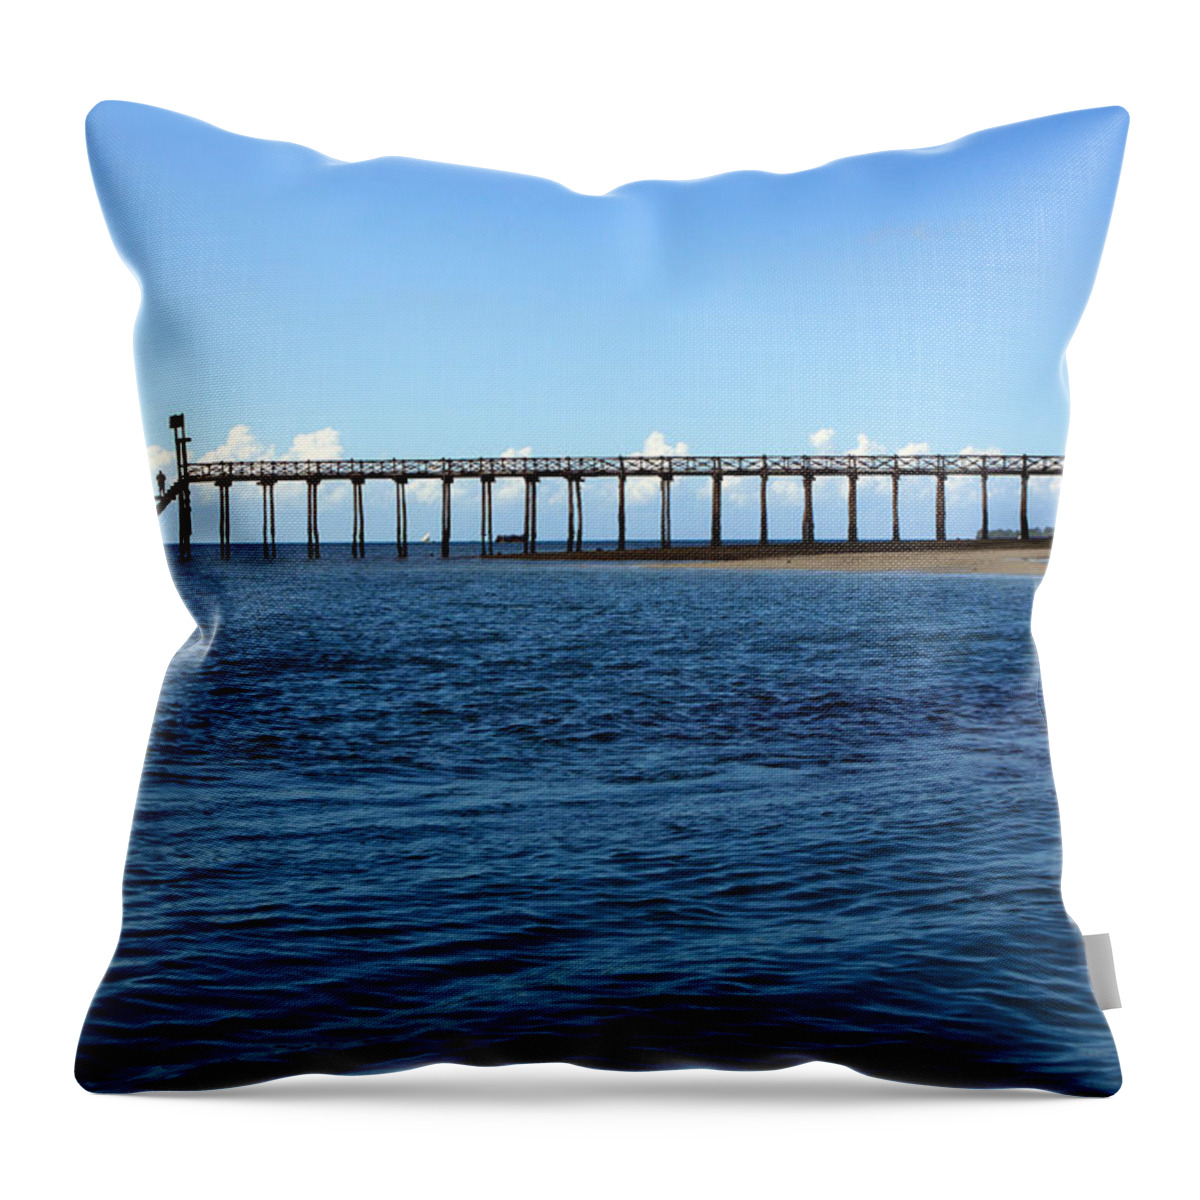 Africa Throw Pillow featuring the photograph Prison Island Jetty - East Africa by Aidan Moran